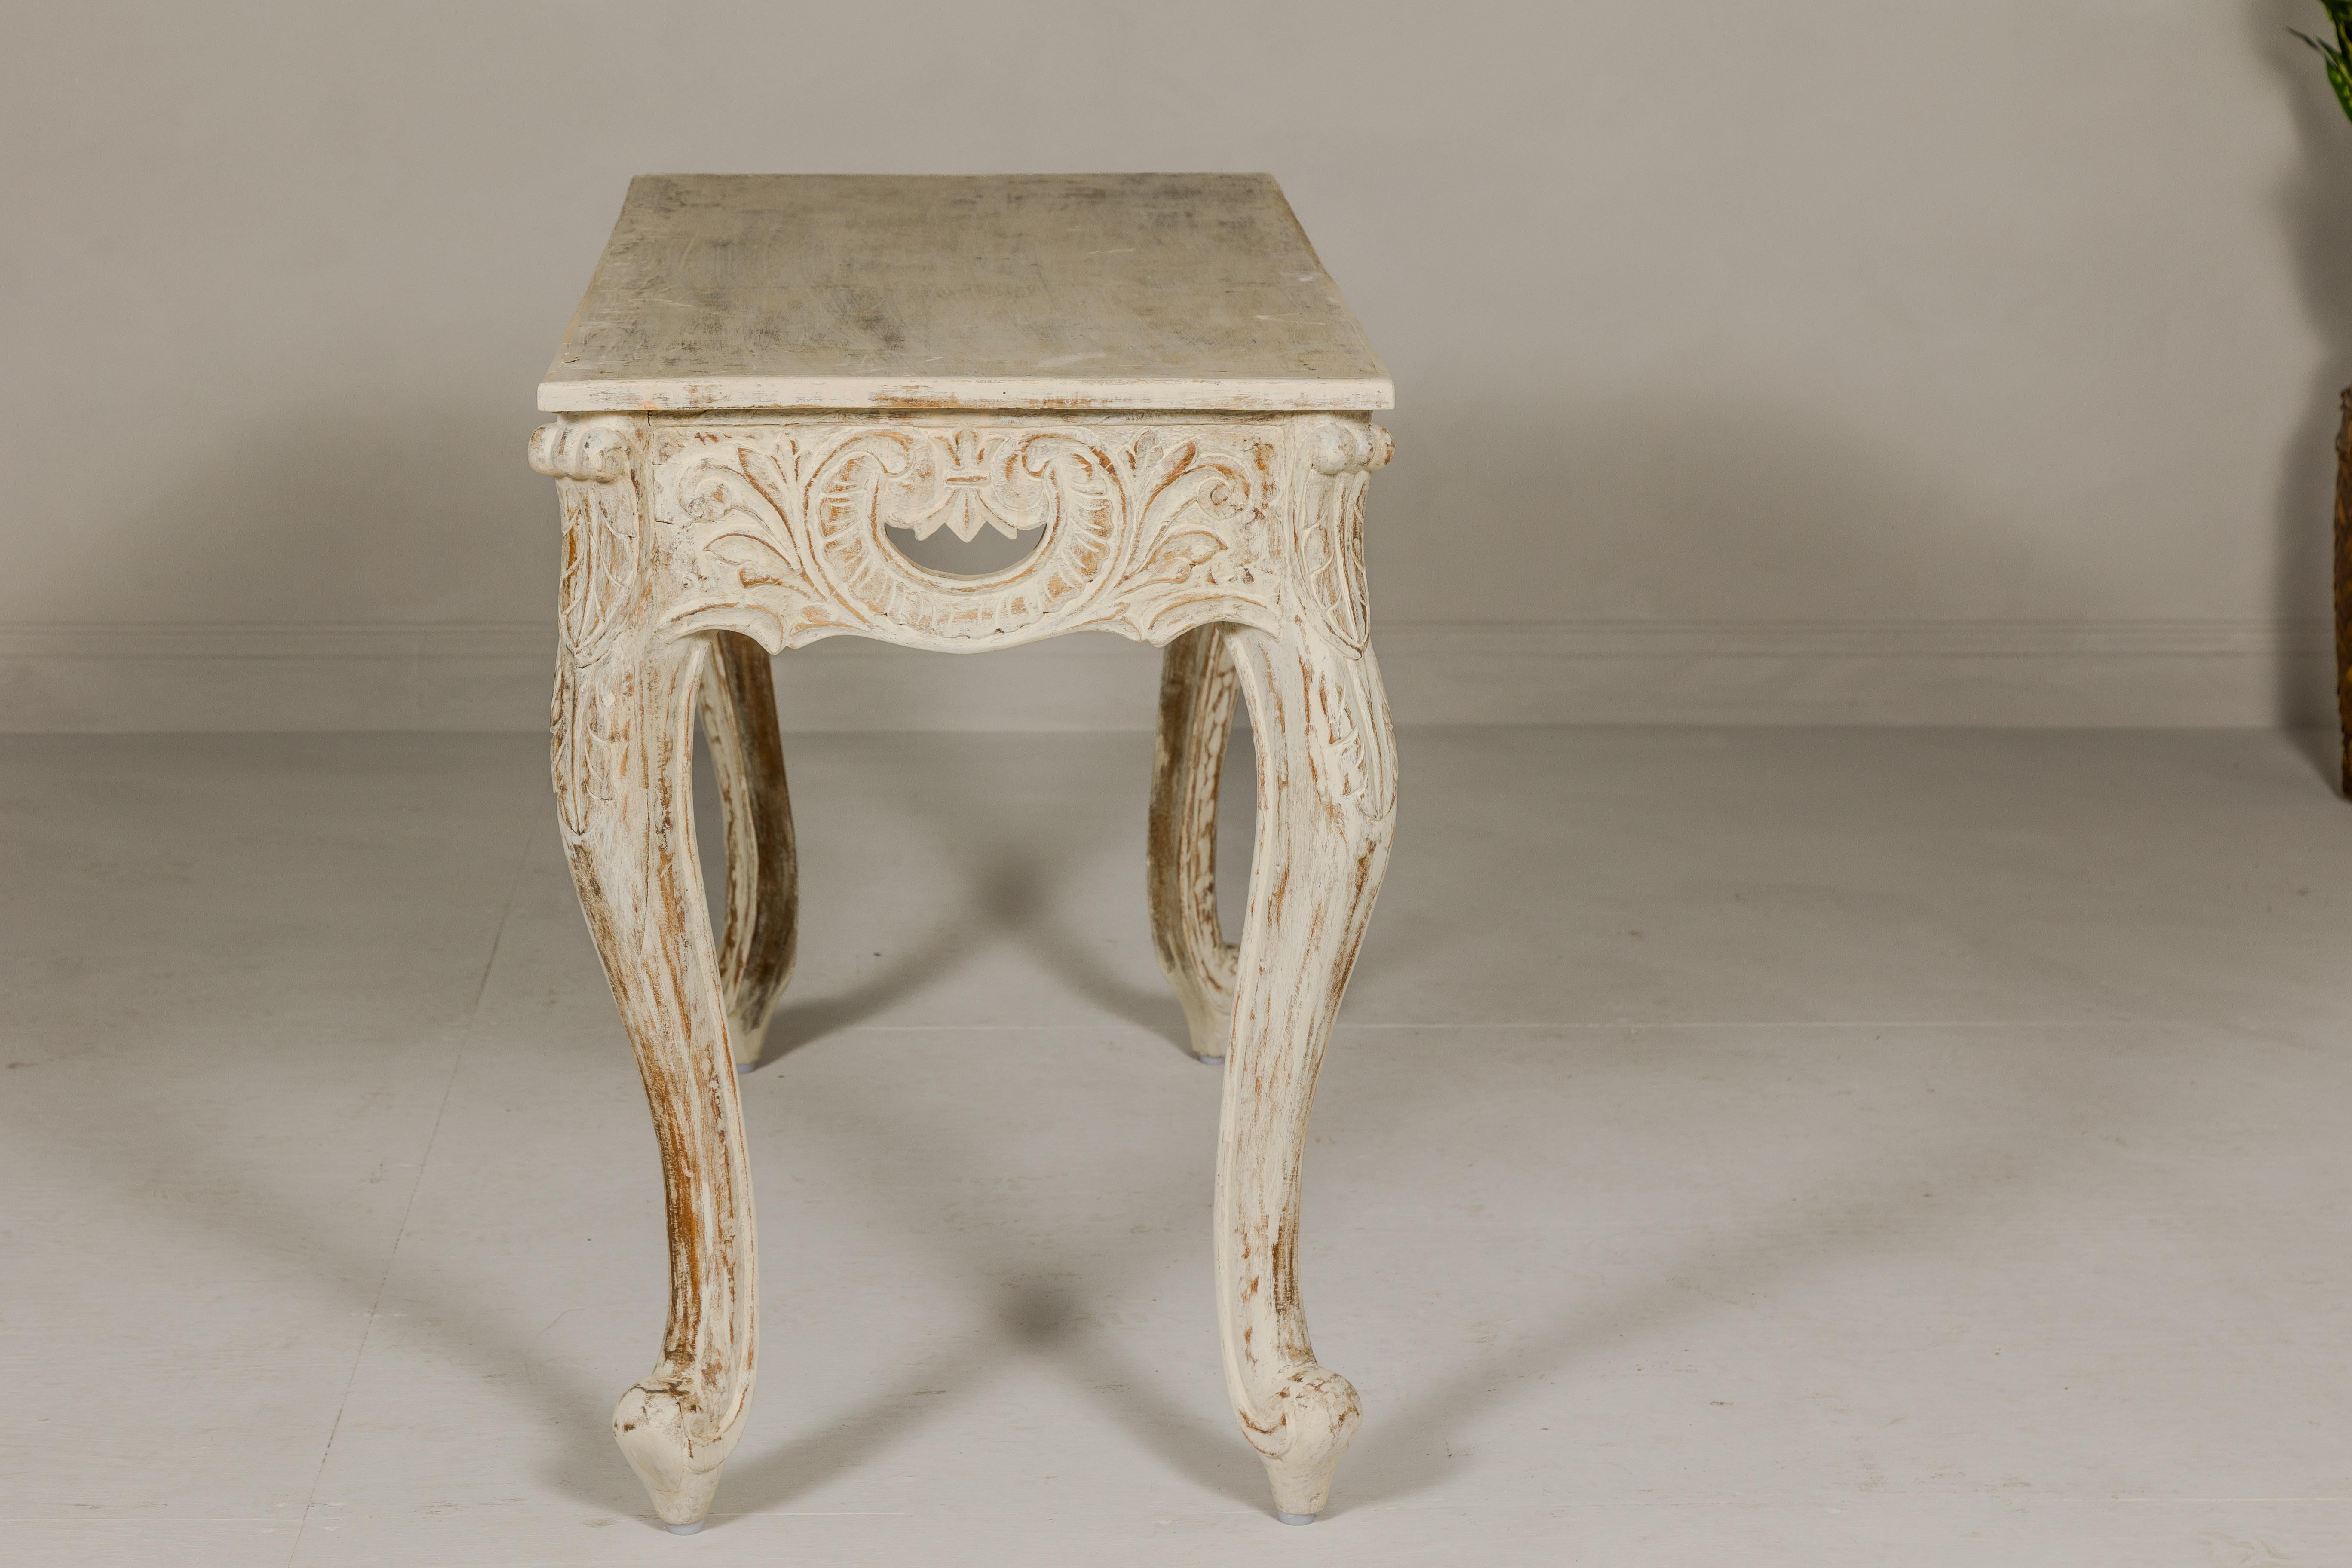 Rococo Style Painted Console Table with Carved Apron and Distressed Finish For Sale 11